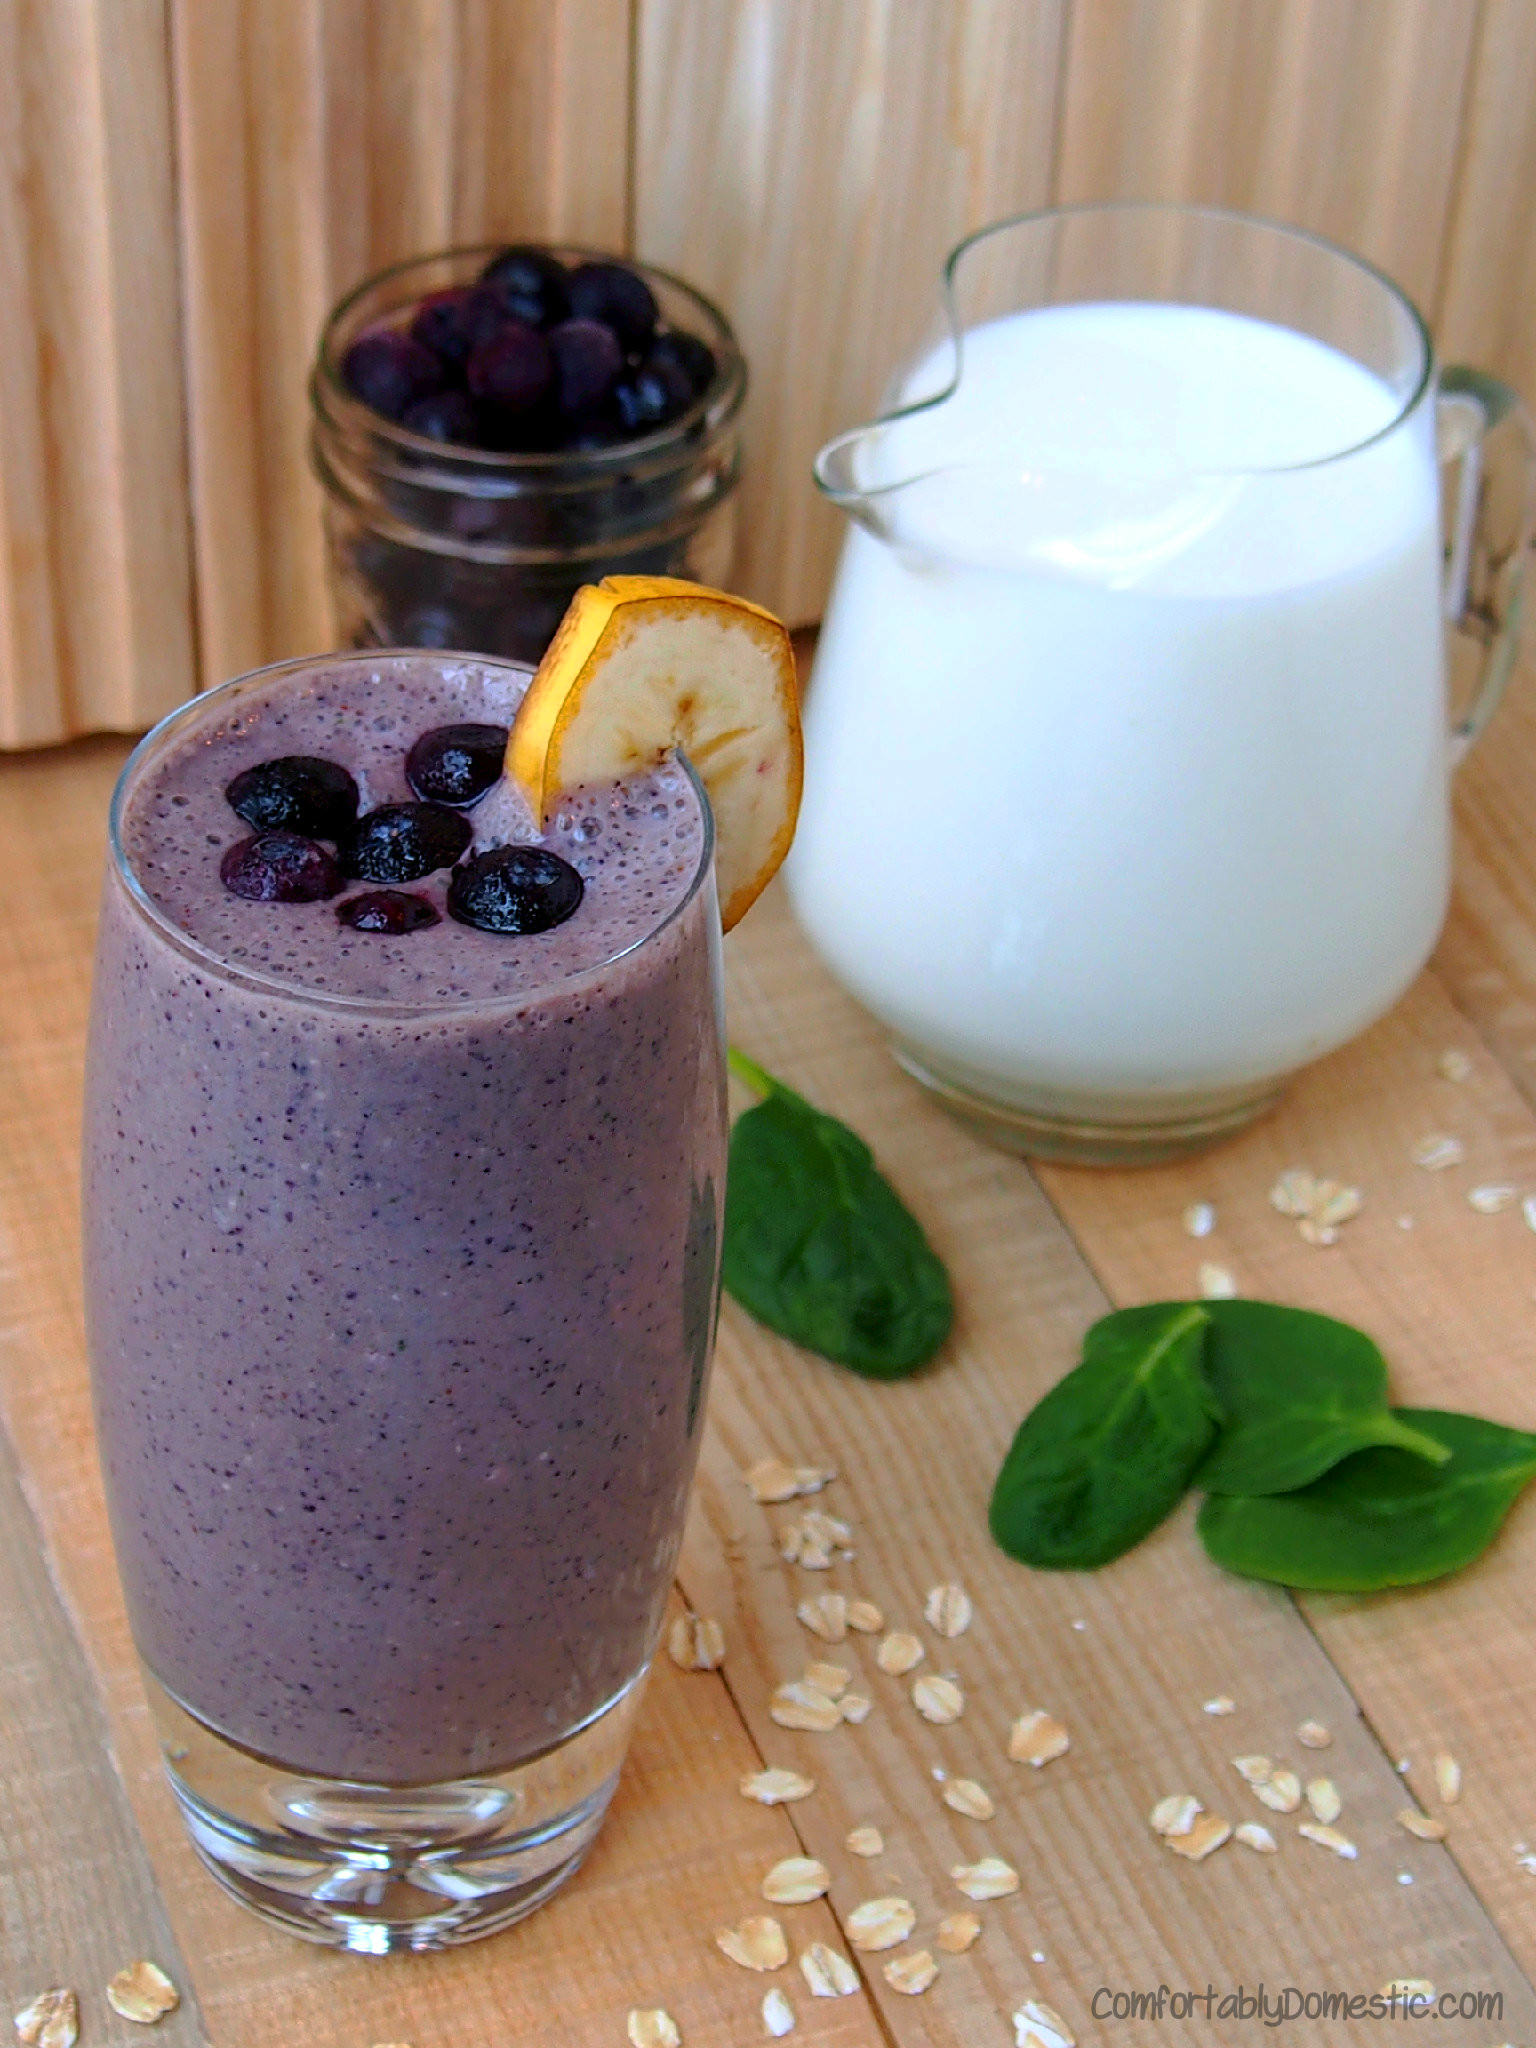 Healthy and delicious, Blueberry Banana Smoothies (with Secret Spinach) | ComfortablyDomestic.com